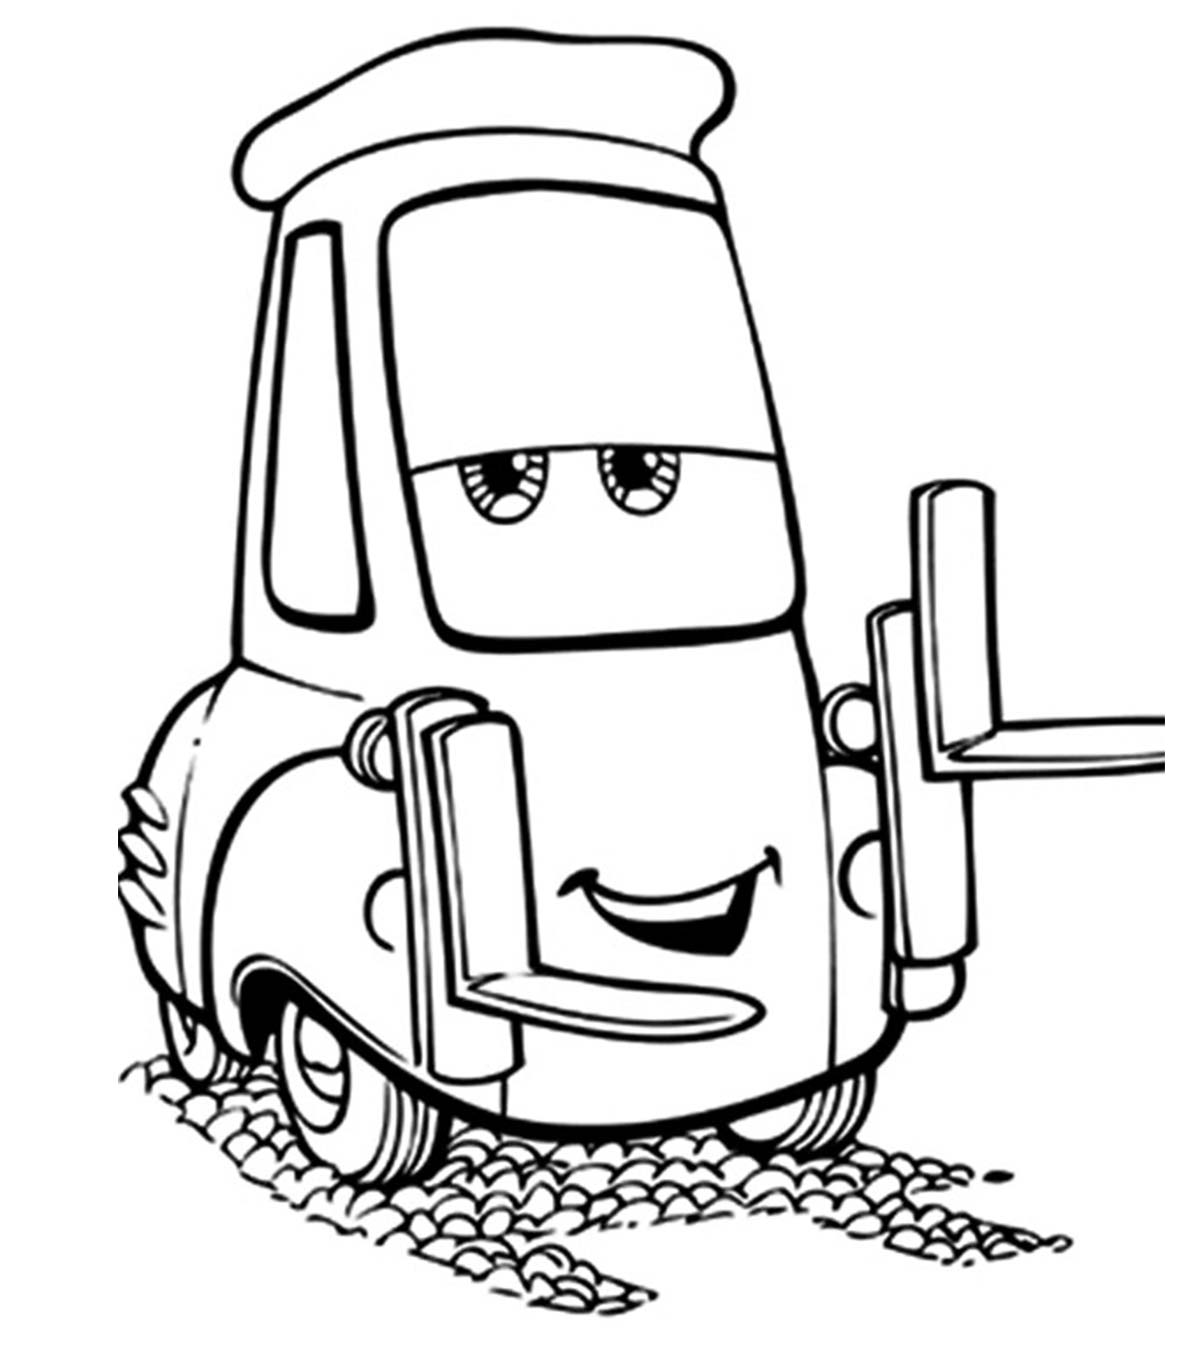 10 Funny Disney Cars Coloring Pages For Your Little Ones_image